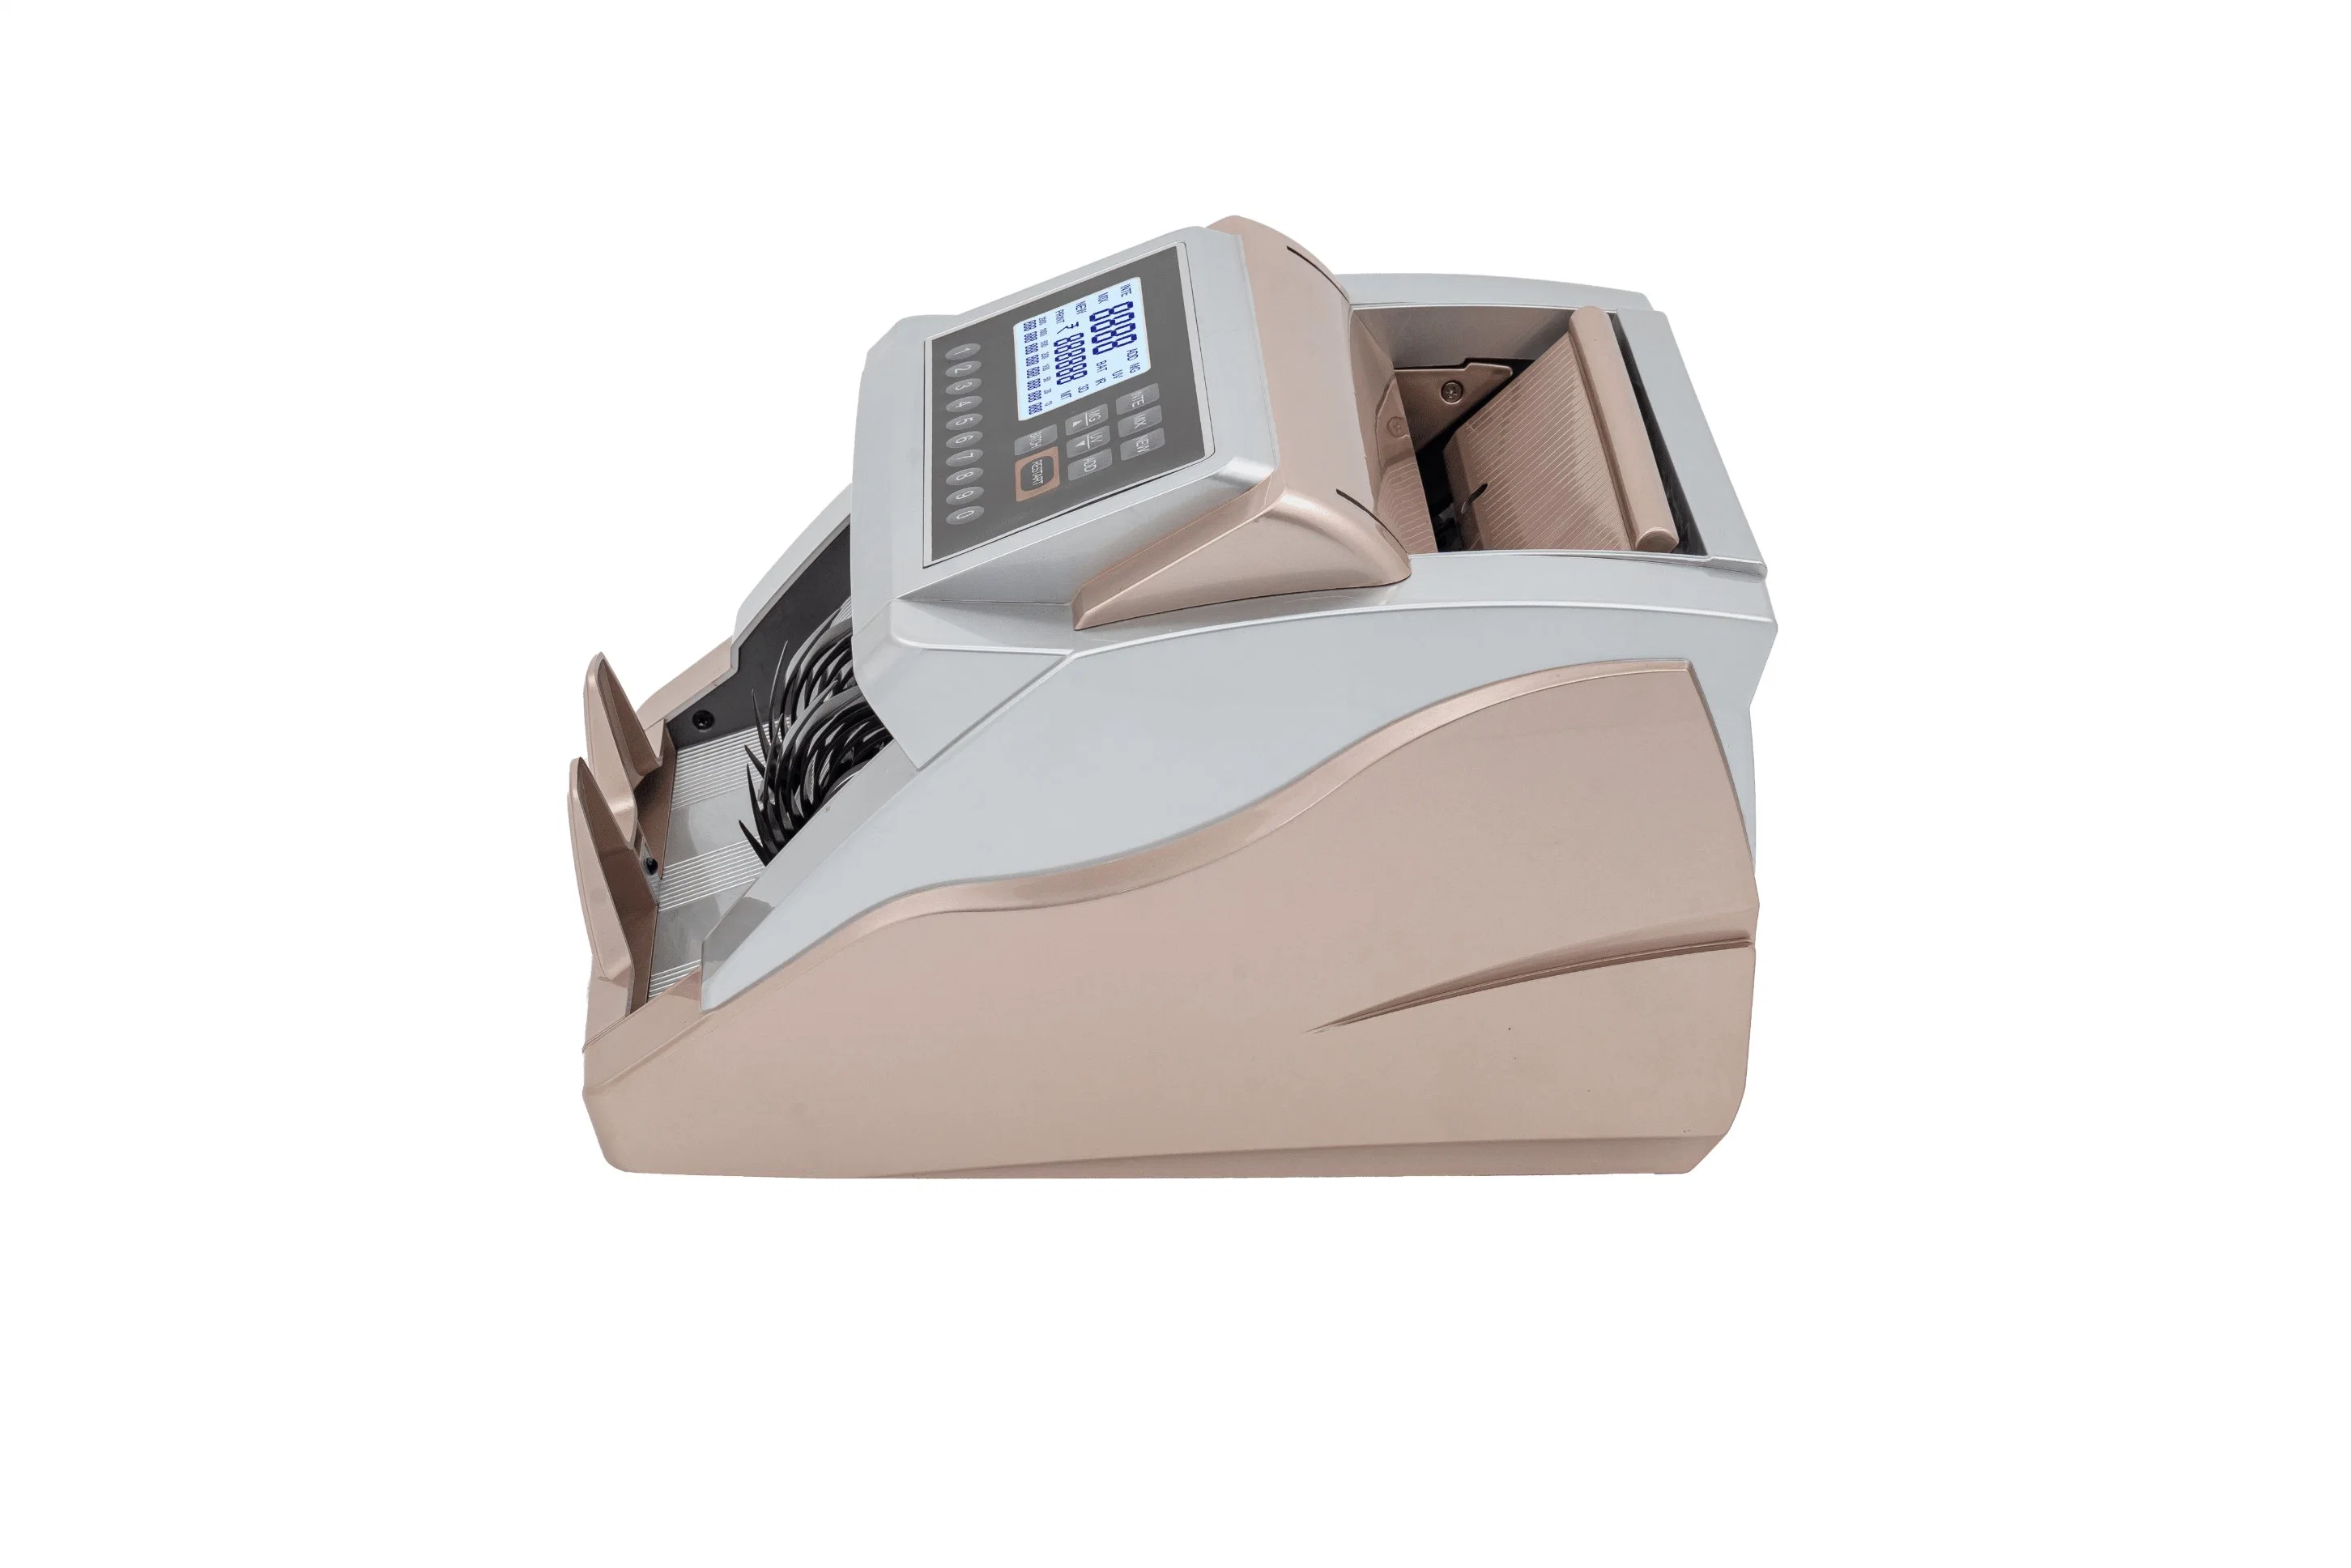 Jn2070 Hot Sales Indian Money/Cash/Bill/Currency/Banknote Counter machines